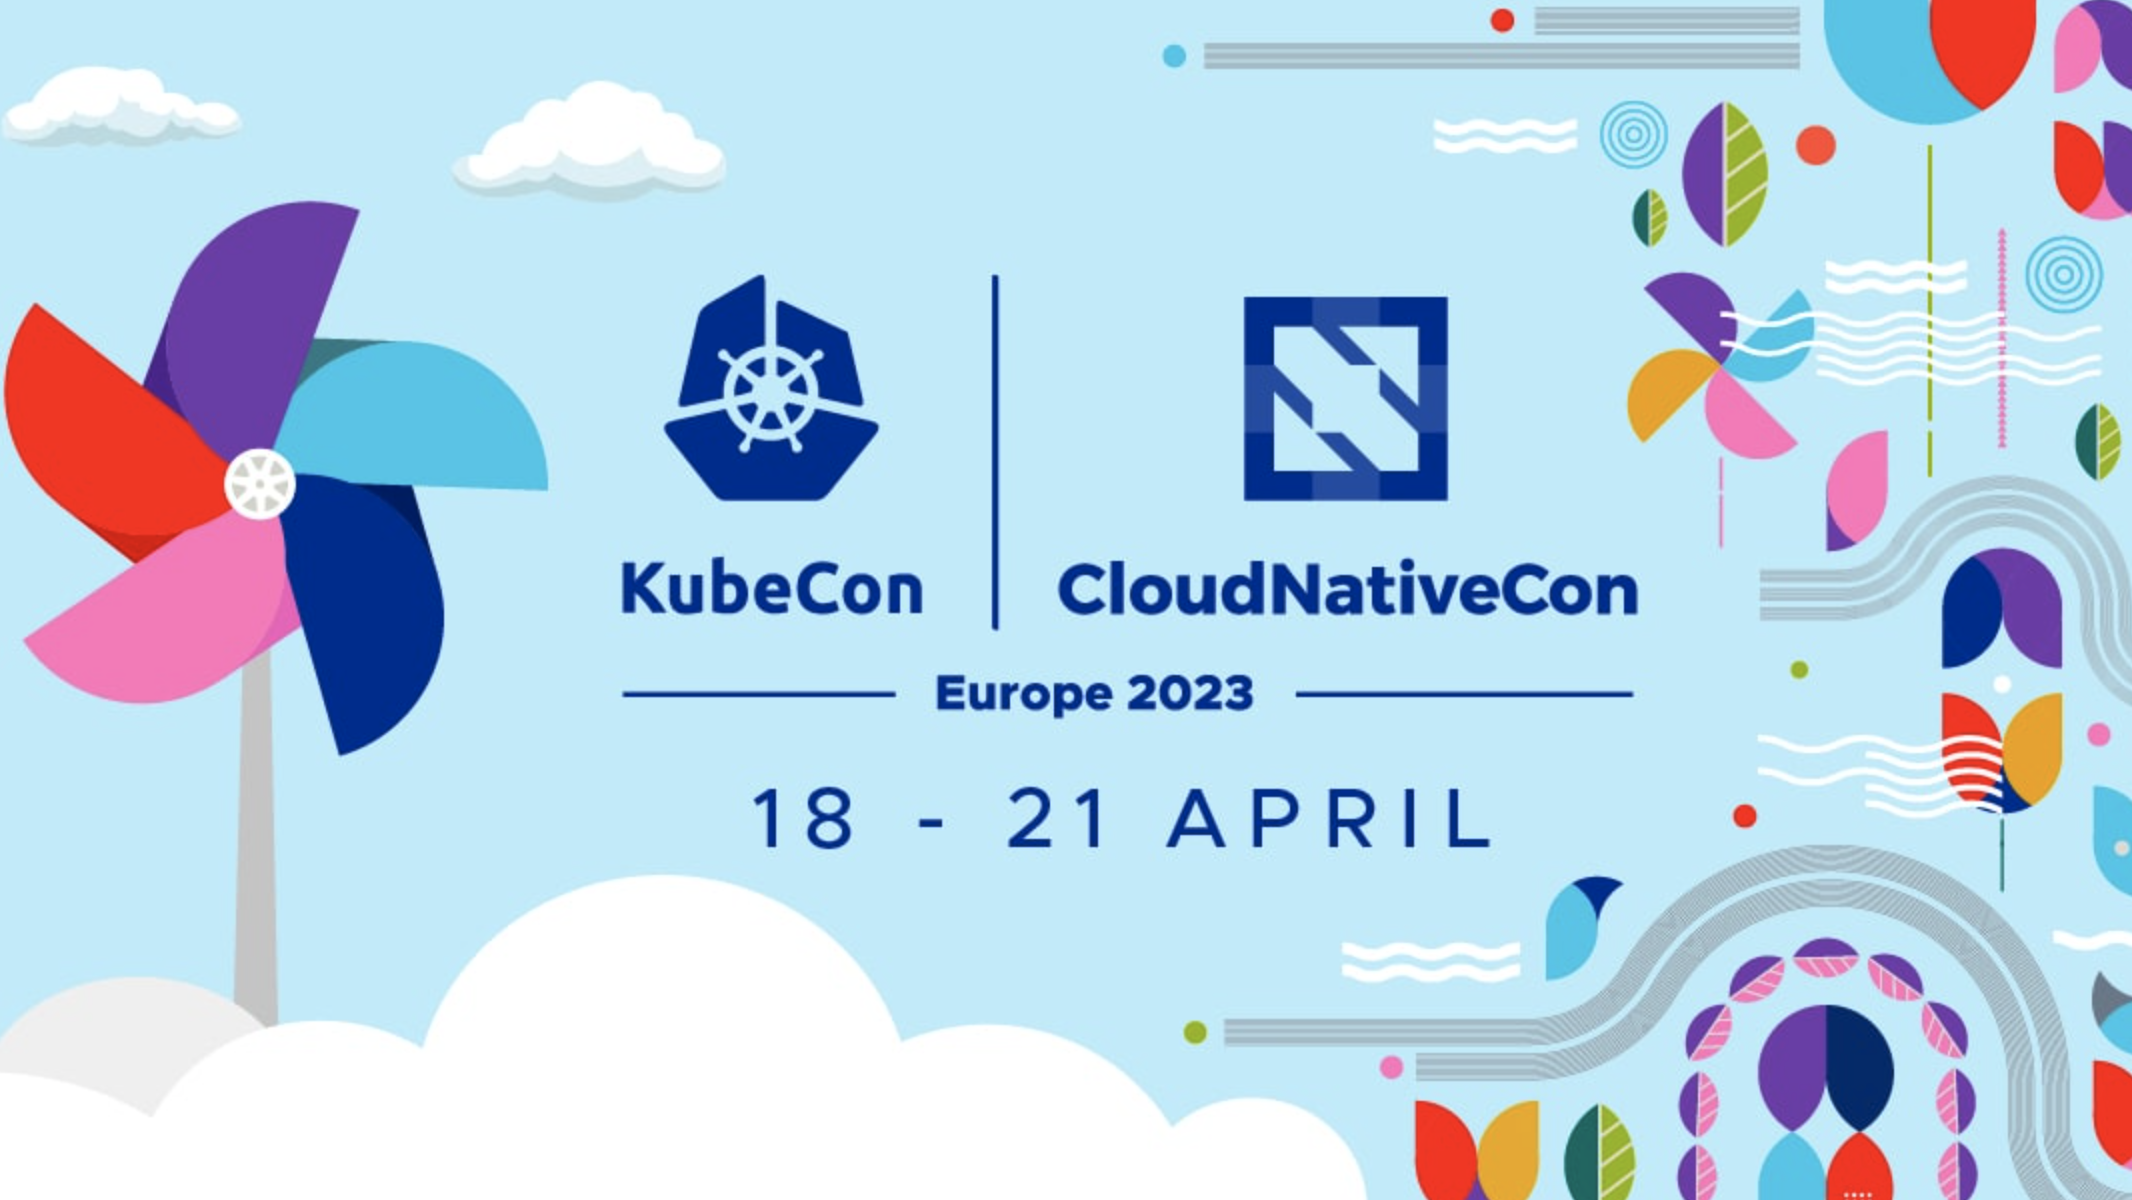 What’s happening at KubeCon Europe 2023